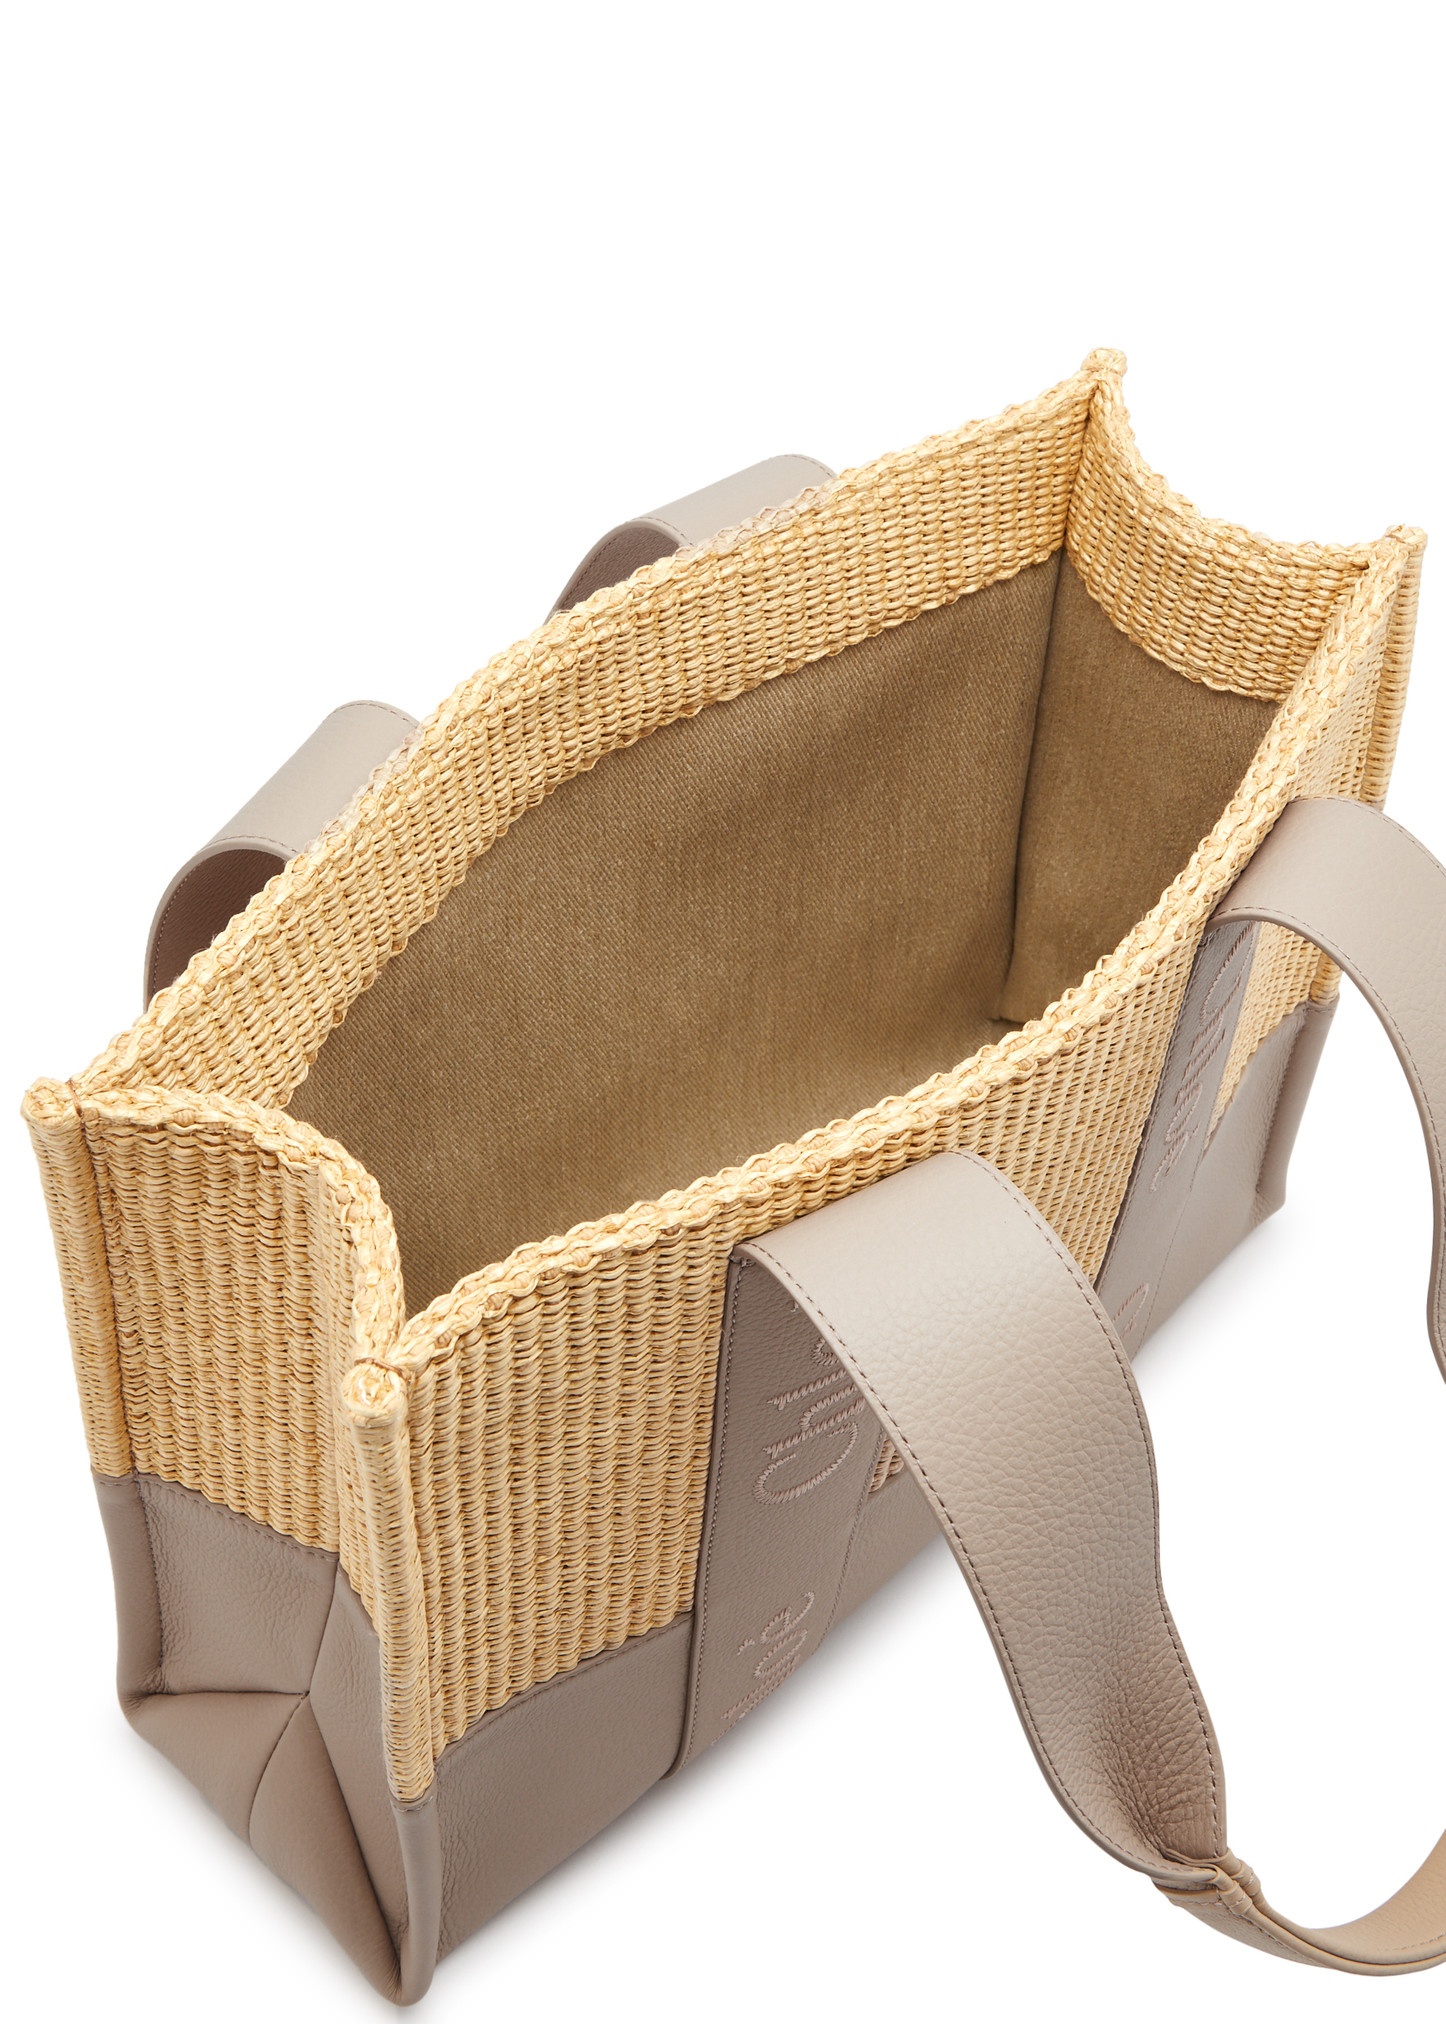 Woody leather and raffia tote - 4